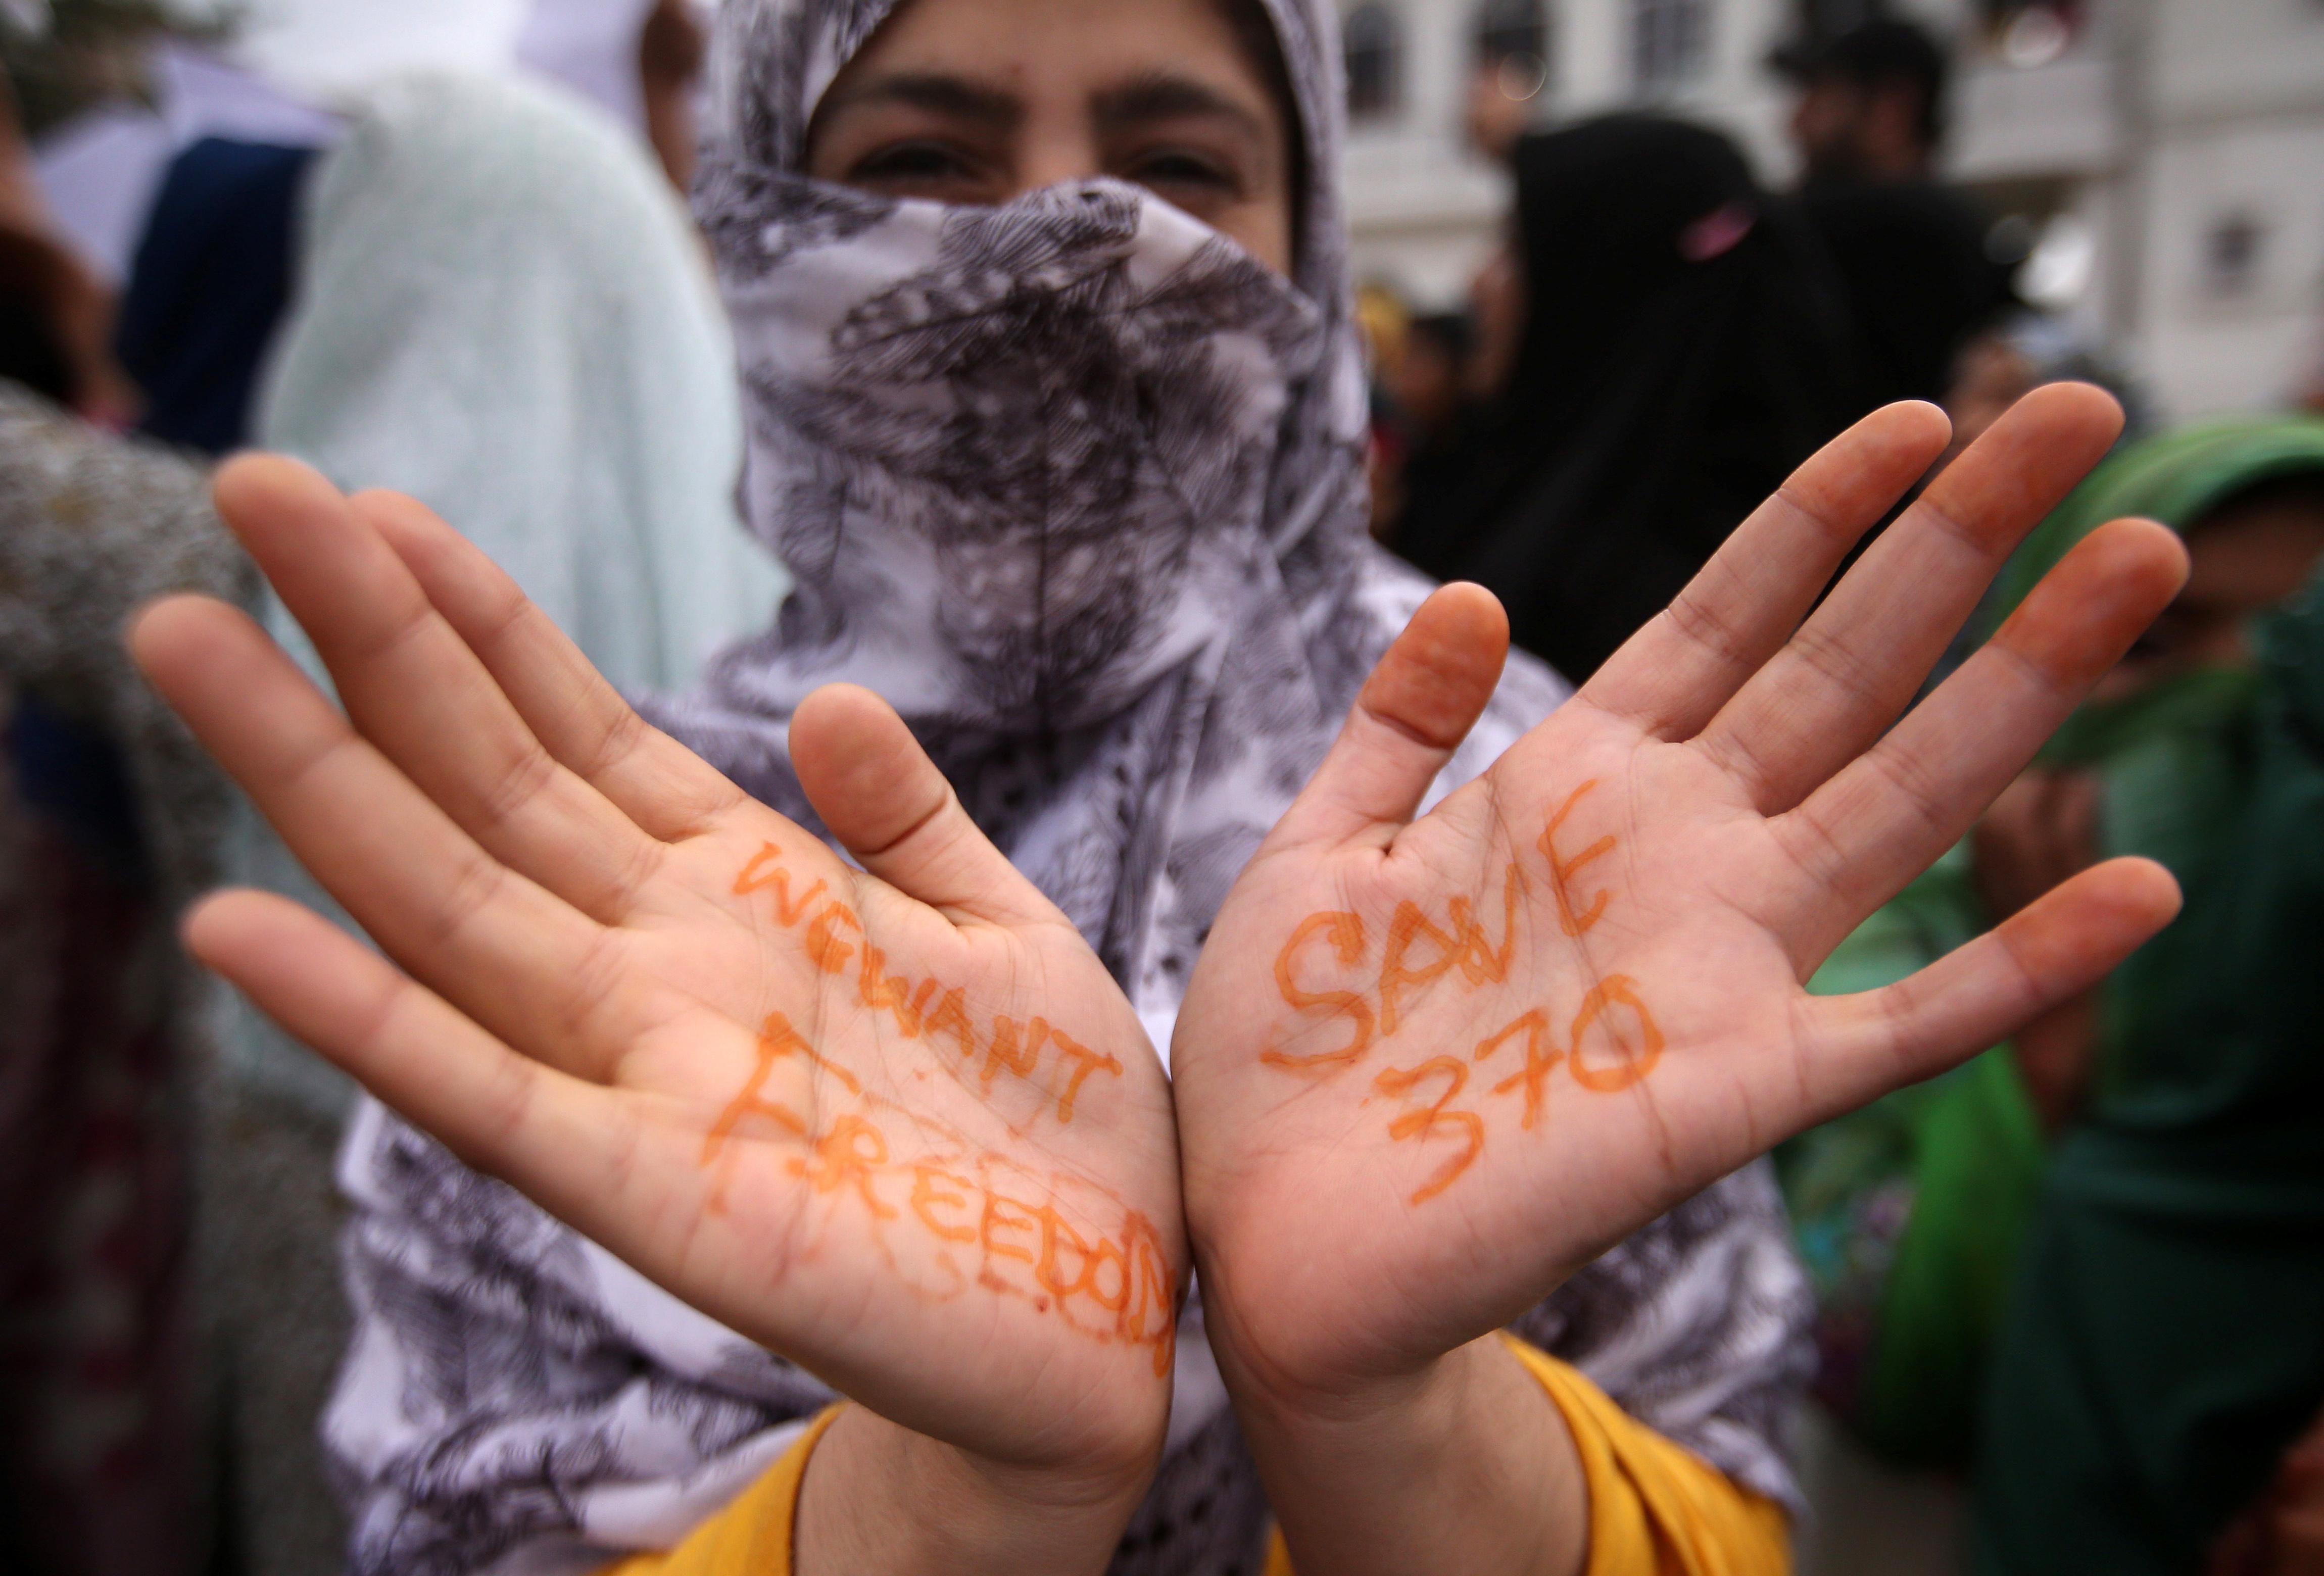 A Kashmiri woman shows her hand with a message as others shout slogans during a protest after the scrapping of the special constitutional status for Kashmir by the Indian government, in Srinagar, August 11, 2019. REUTERS/Danish Siddiqui